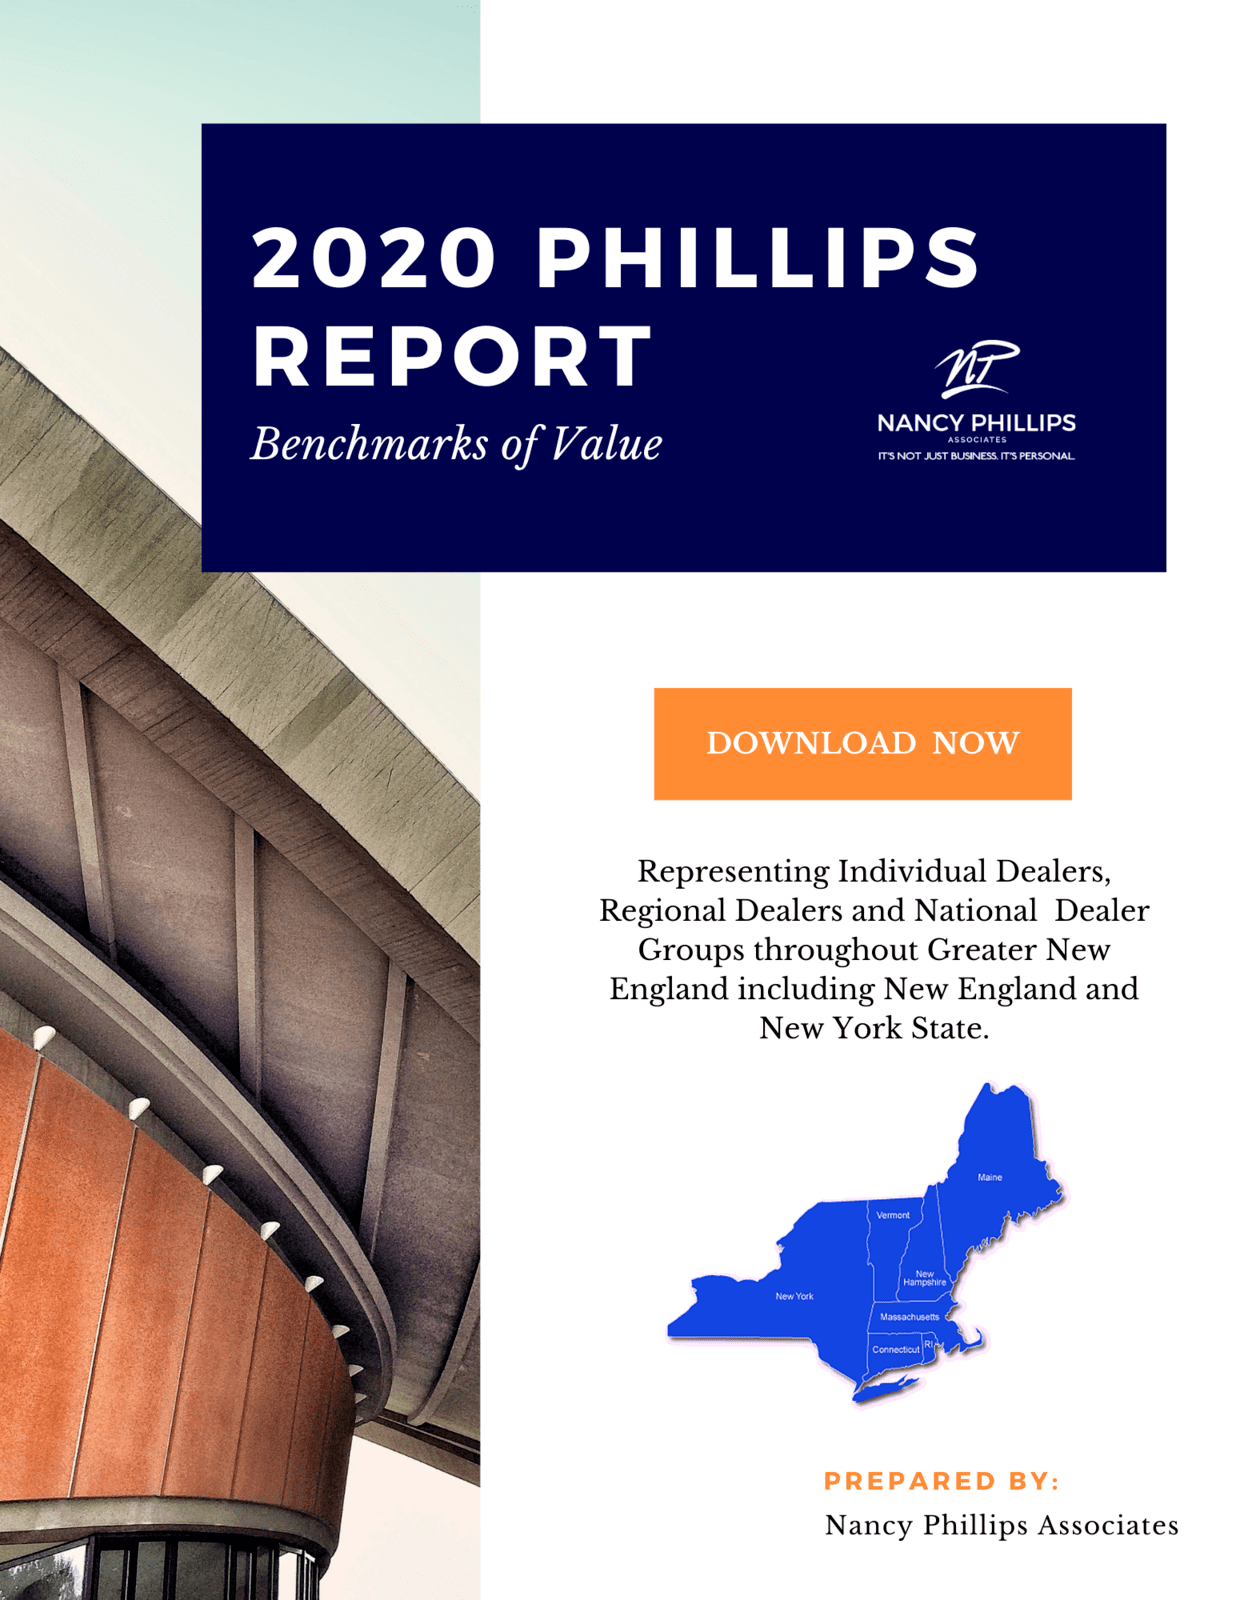 The Phillips Report - 2020 Dealership Values in Greater New England